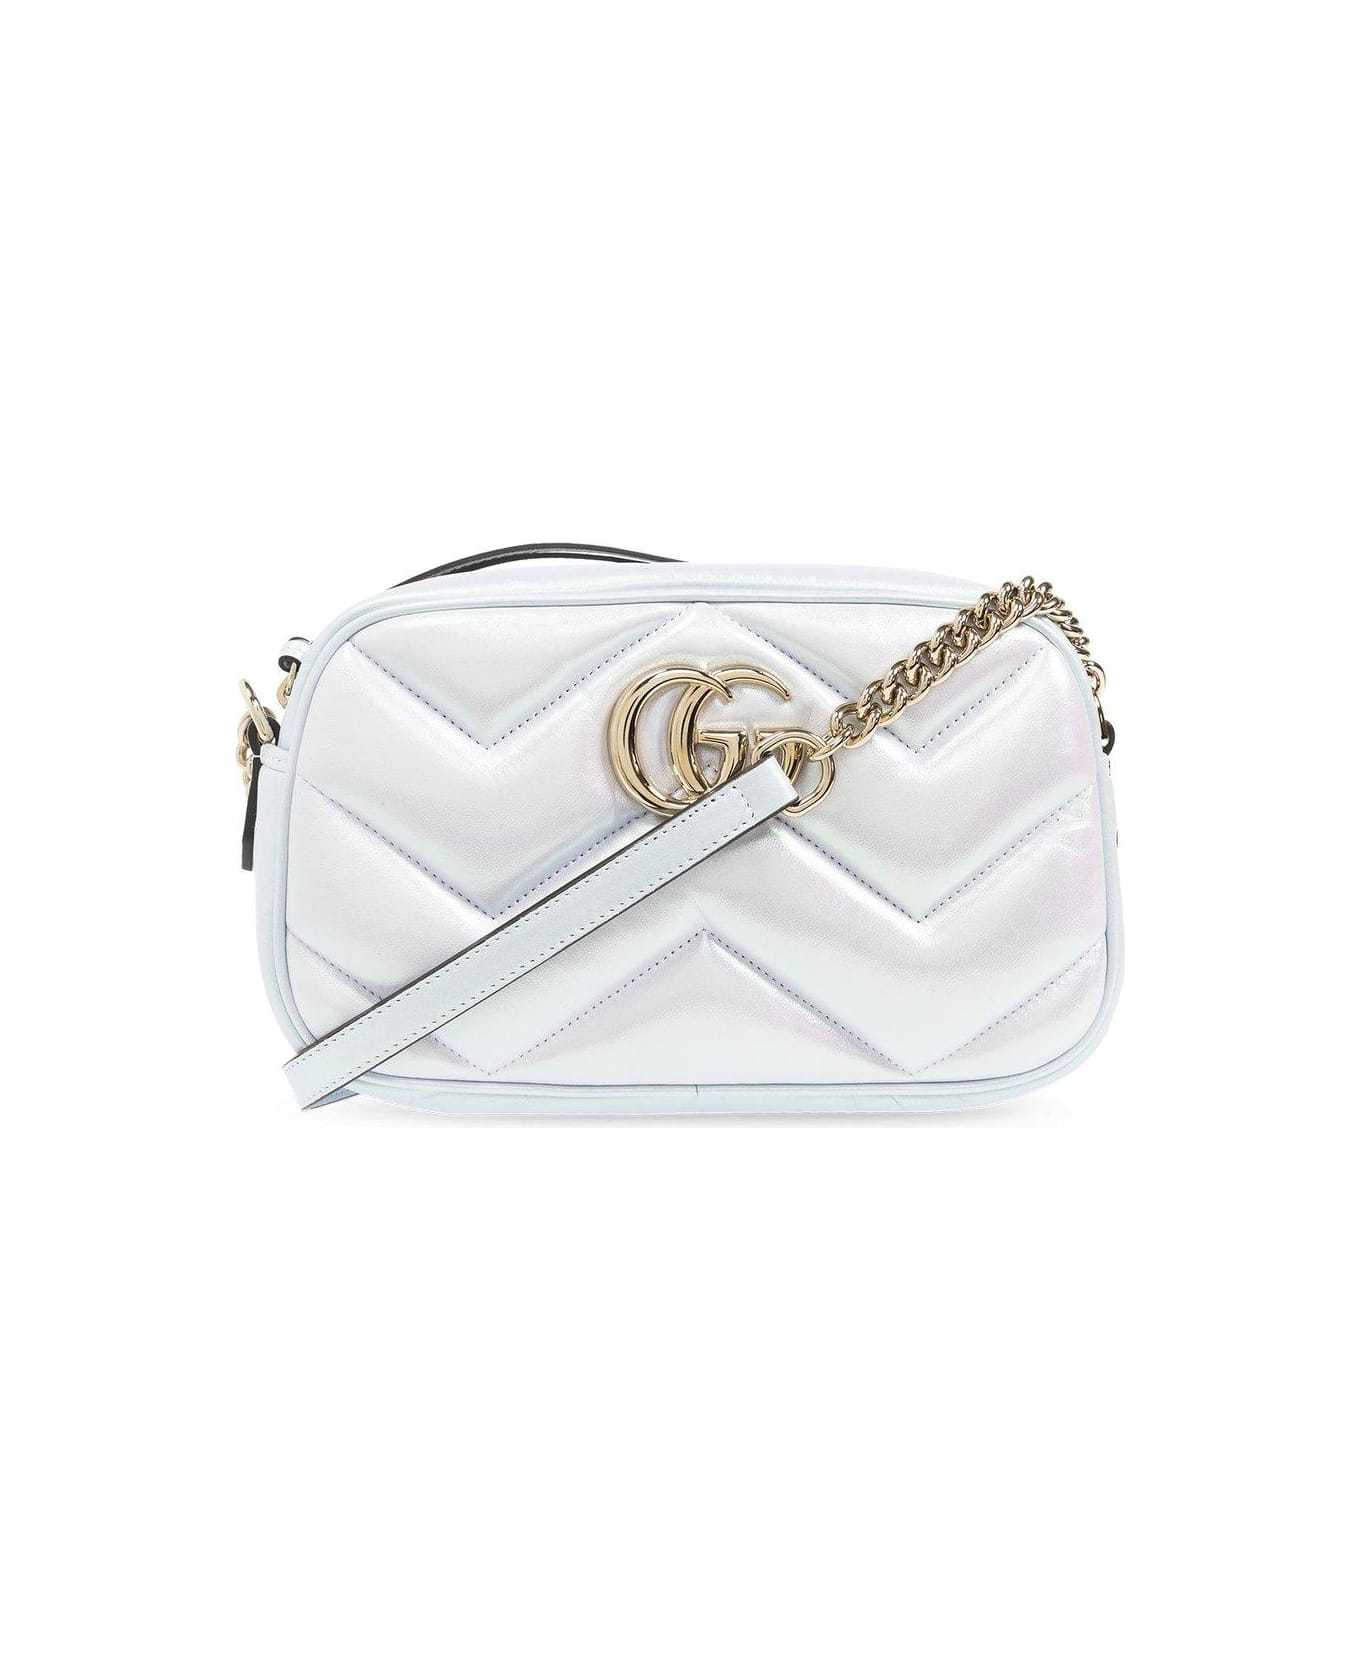 Gucci Gg Marmont Small Shoulder Bag - Iride Snow